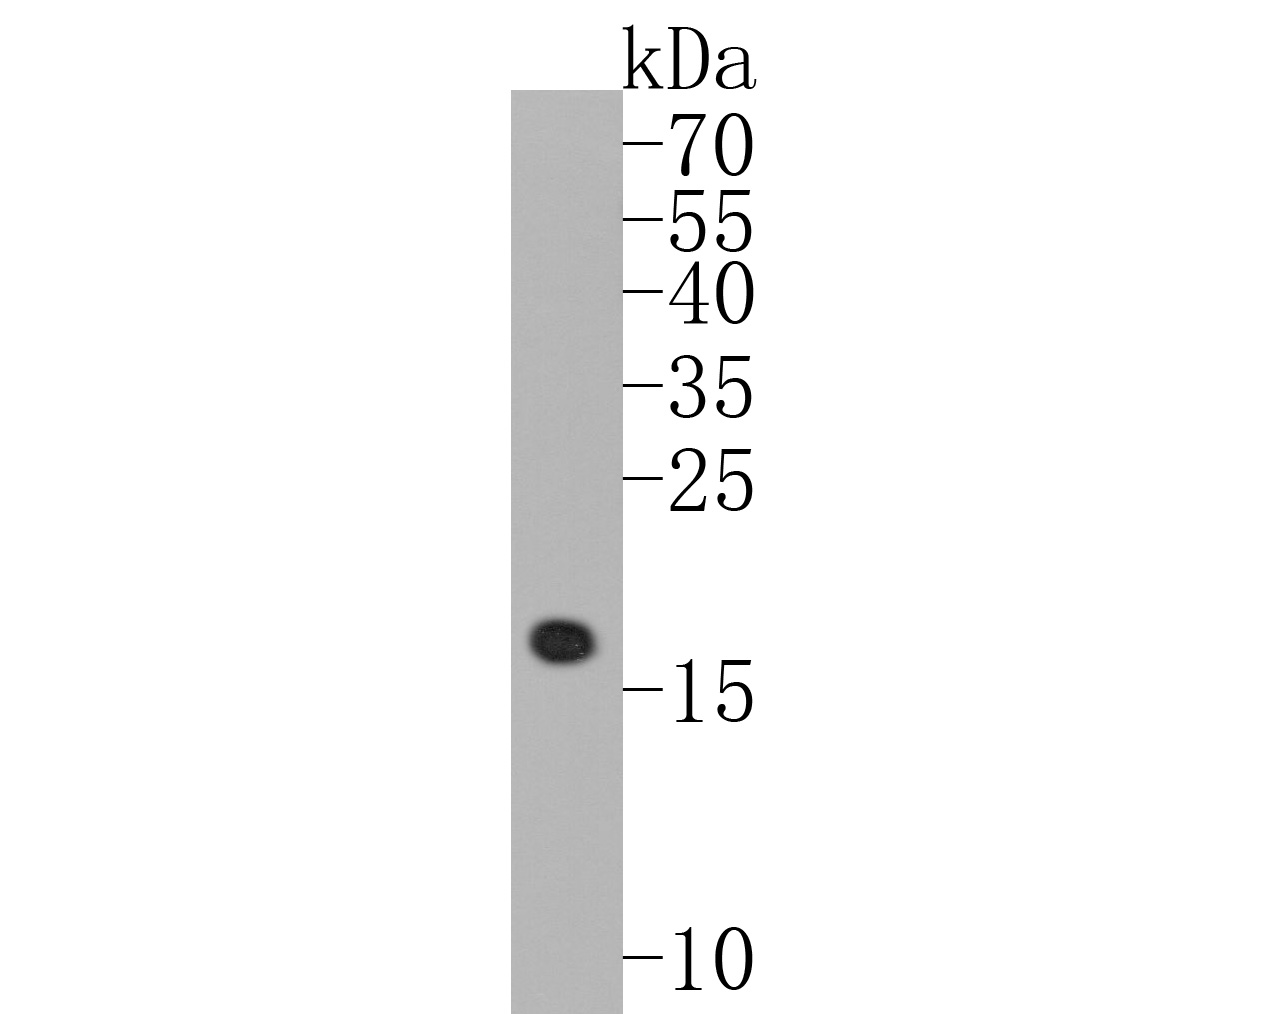 Western blot analysis of DNAJC15 on mouse heart tissue lysates. Proteins were transferred to a PVDF membrane and blocked with 5% BSA in PBS for 1 hour at room temperature. The primary antibody (ET1607-52, 1/500) was used in 5% BSA at room temperature for 2 hours. Goat Anti-Rabbit IgG - HRP Secondary Antibody (HA1001) at 1:5,000 dilution was used for 1 hour at room temperature.